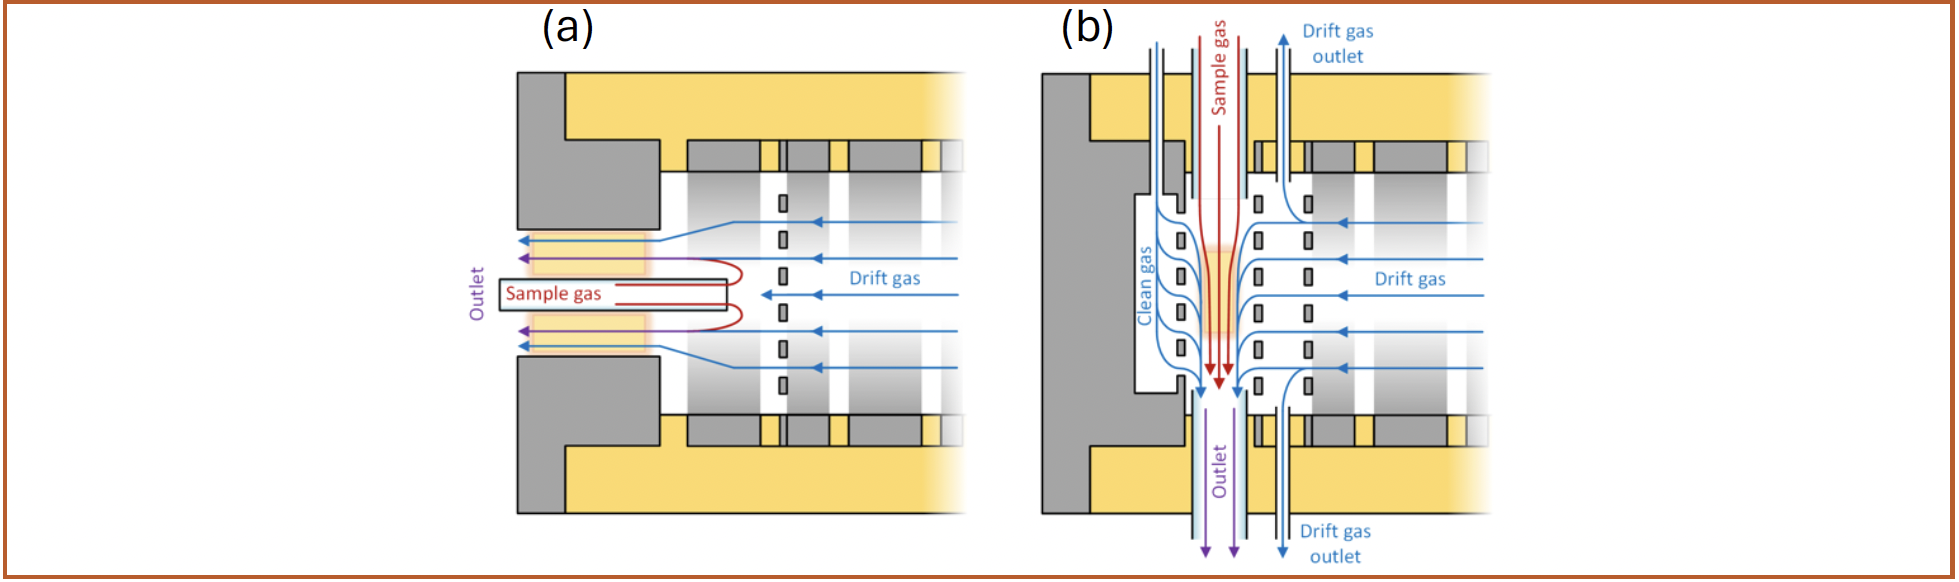 FIGURE 3: Gas flow schemes inside IMS drift tubes optimized for use as a GC detector. (a) Direct axial sample introduction utilizing the drift gas as make-up gas; and (b) focused sample introduction with a laminar flow utilizing the drift gas for focusing. The glowing rectangles mark the areas of ion generation.